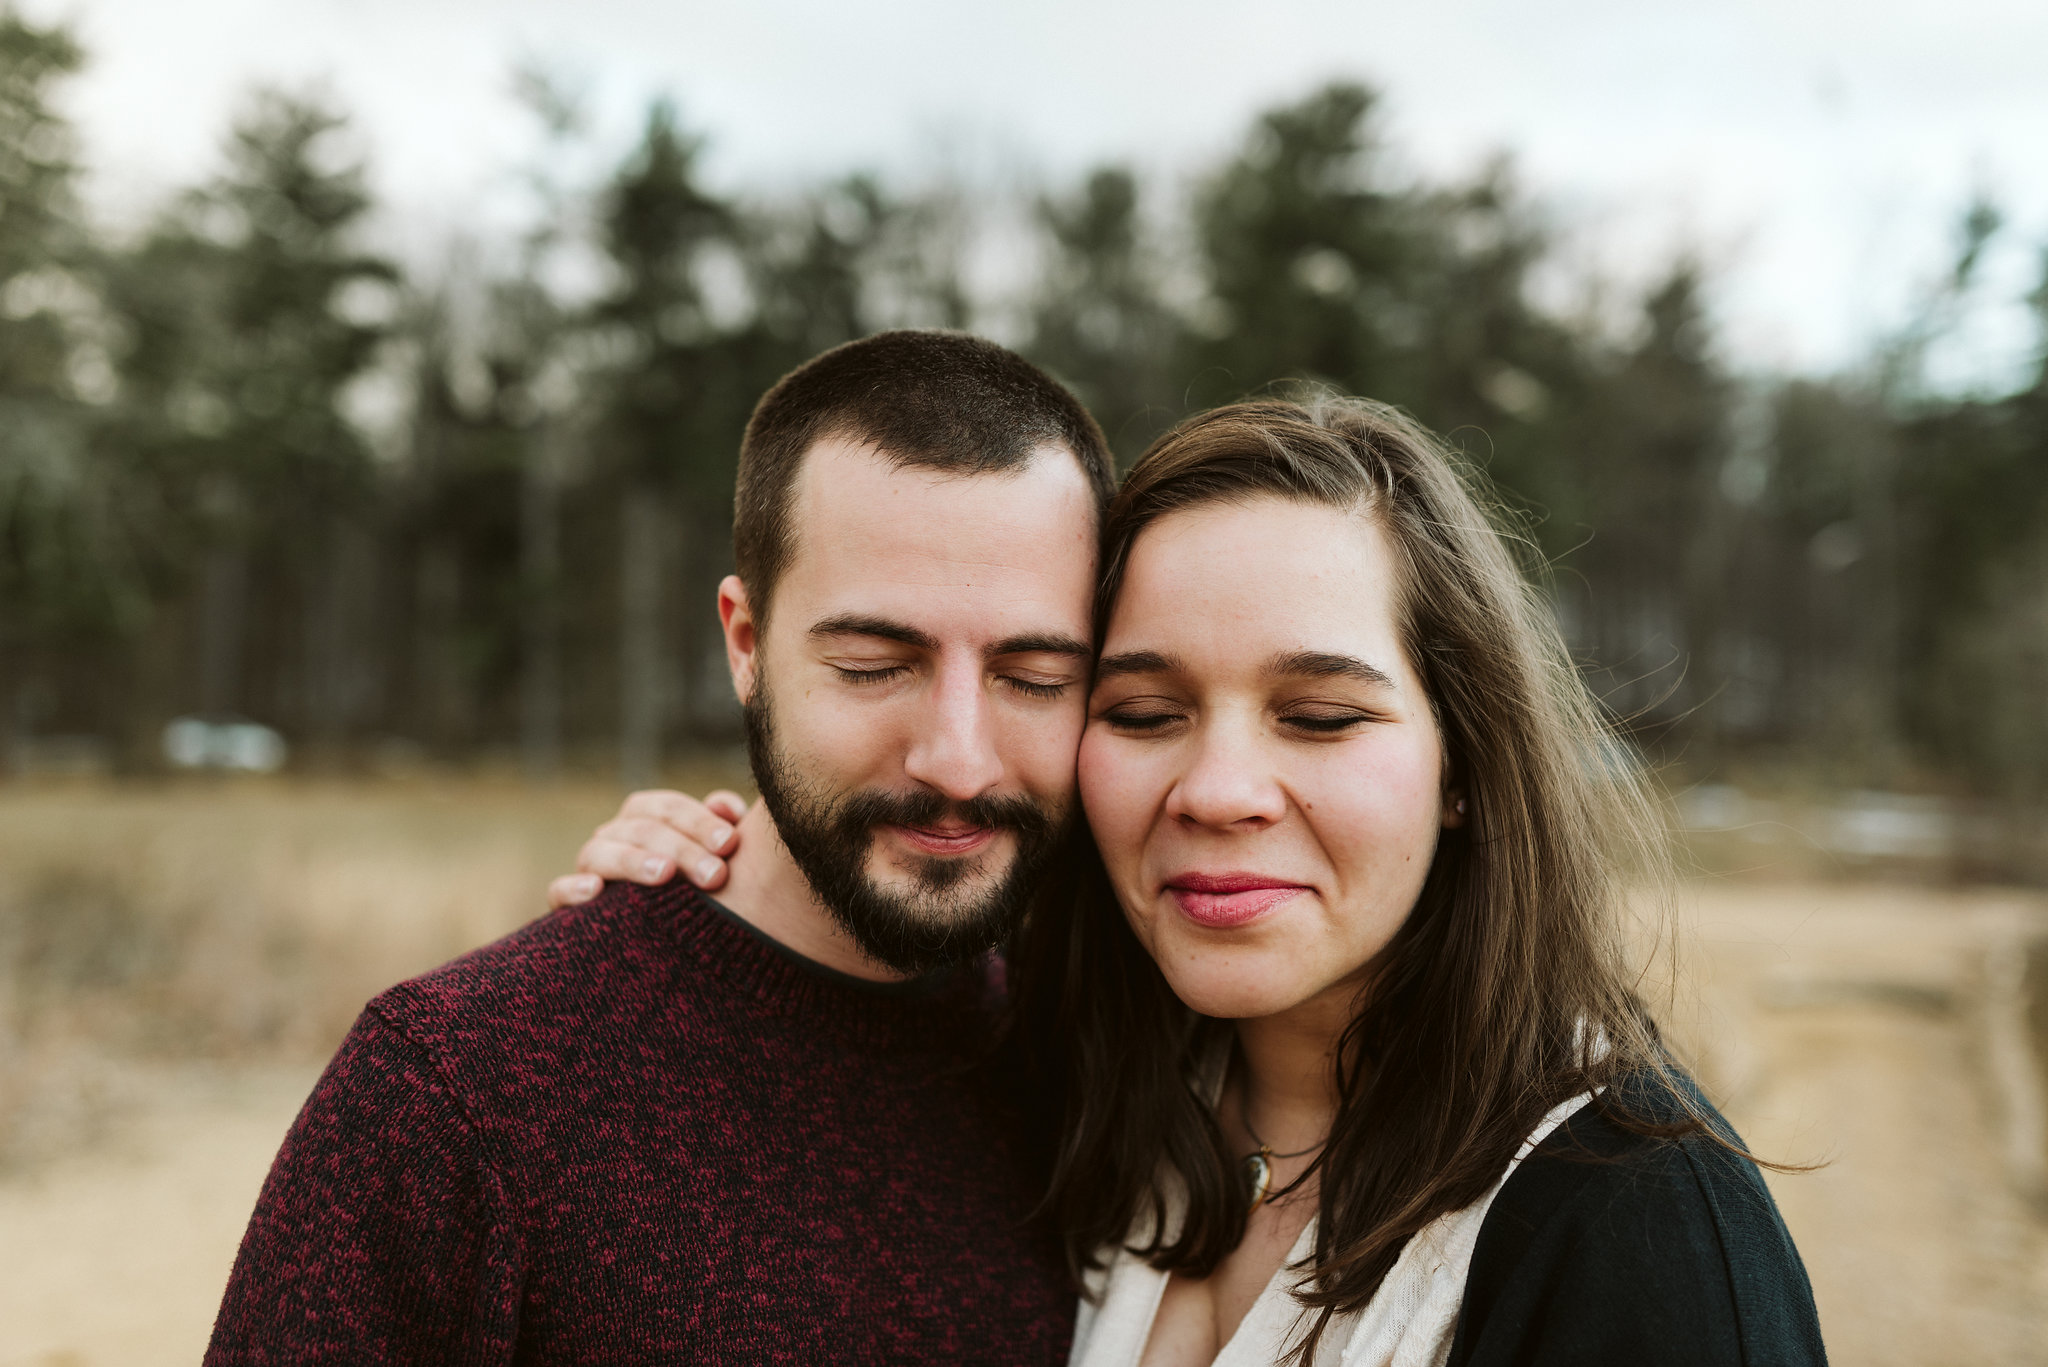  Baltimore County, Loch Raven Reservoir, Maryland Wedding Photographer, Winter, Engagement Photos, Nature, Romantic, Clean and Classic, Bride and Groom Side by Side with Their Eyes Closed 